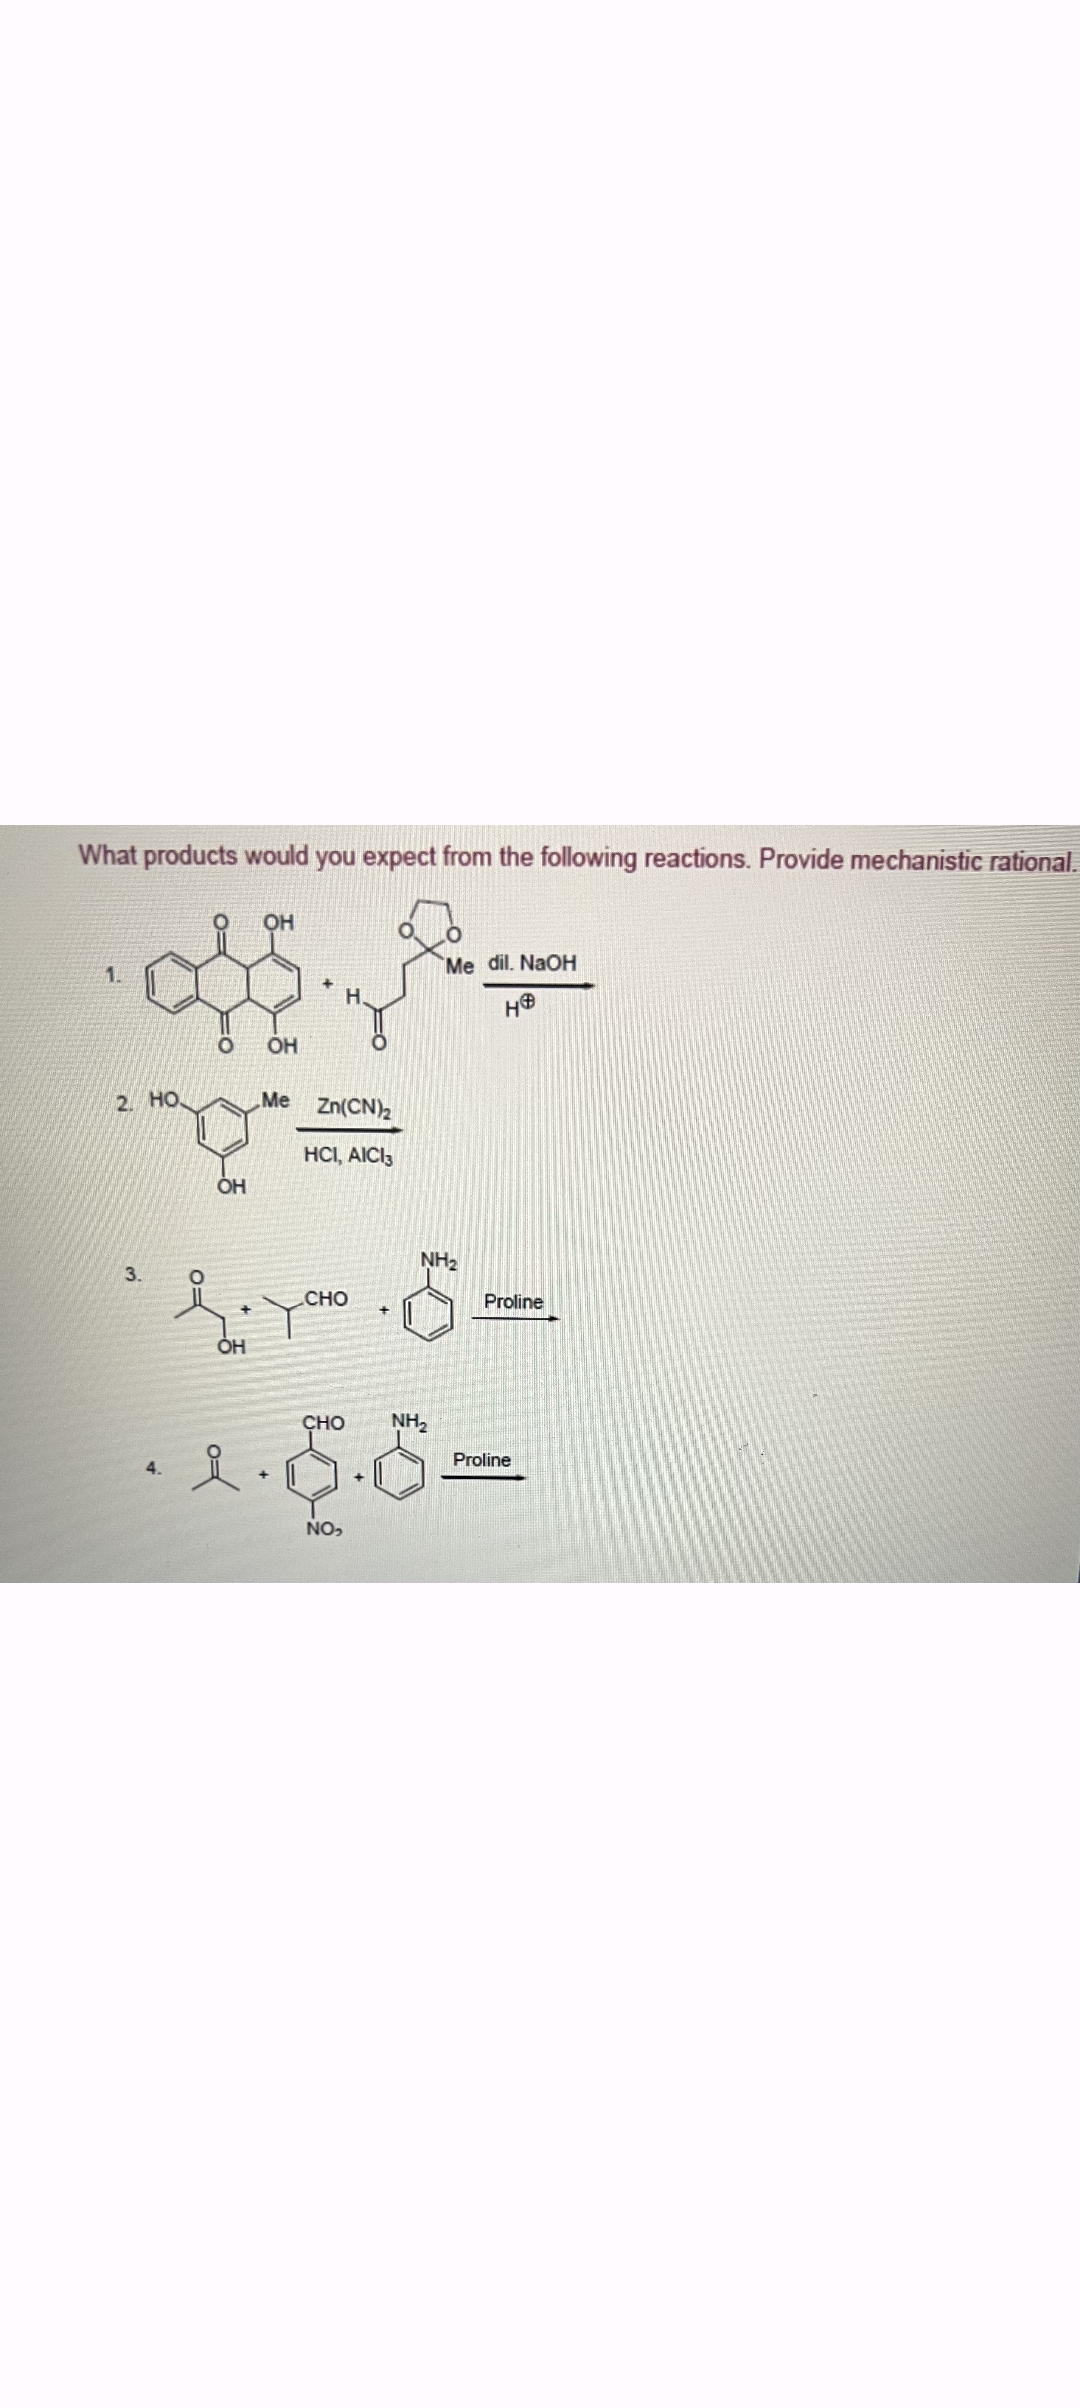 What products would you expect from the following reactions. Provide mechanistic rational.
OH
1.
2. HO
O
OH
Me
Zn(CN)2
HCI, AICI3
OH
Me dil. NaOH
HO
NH2
3.
°
CHO
Proline
OH
CHO
NH₂
Proline
요
NO,